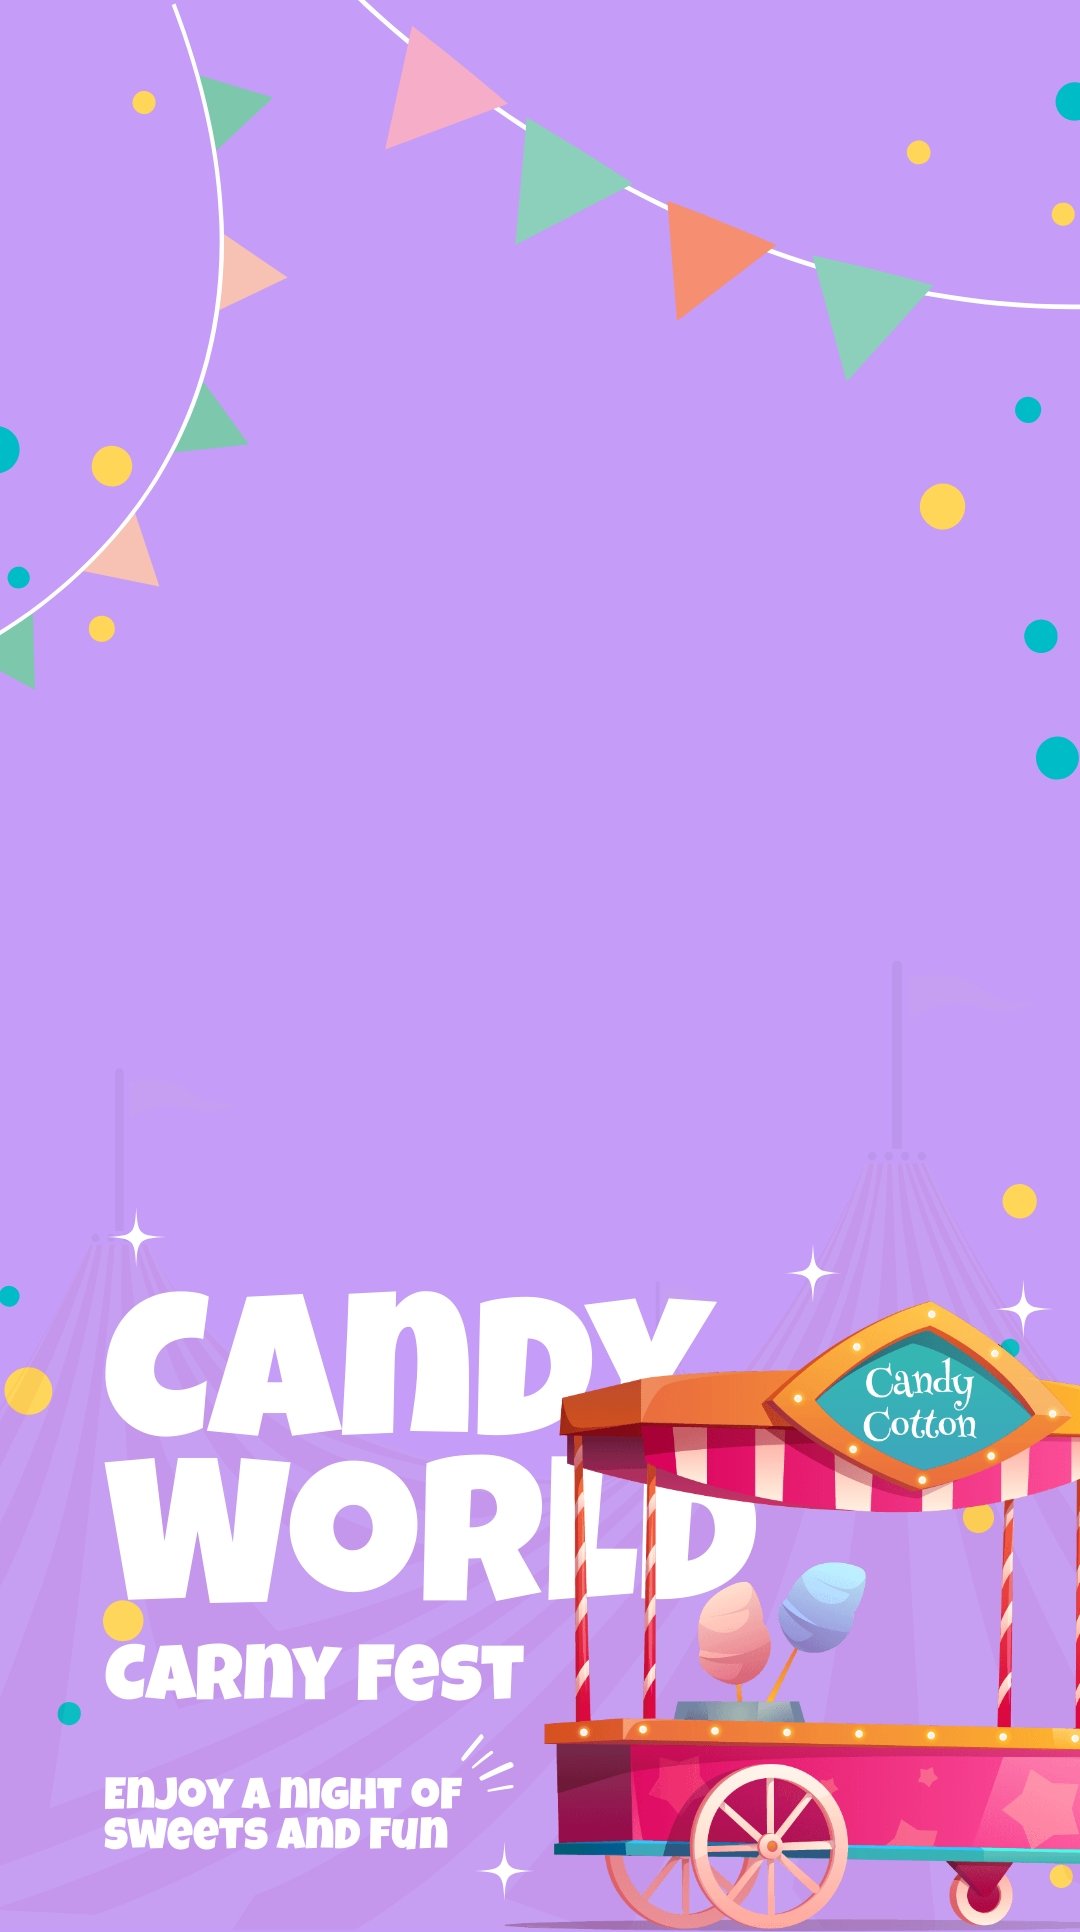 Free Carnival Festival Snapchat Geofilter Template